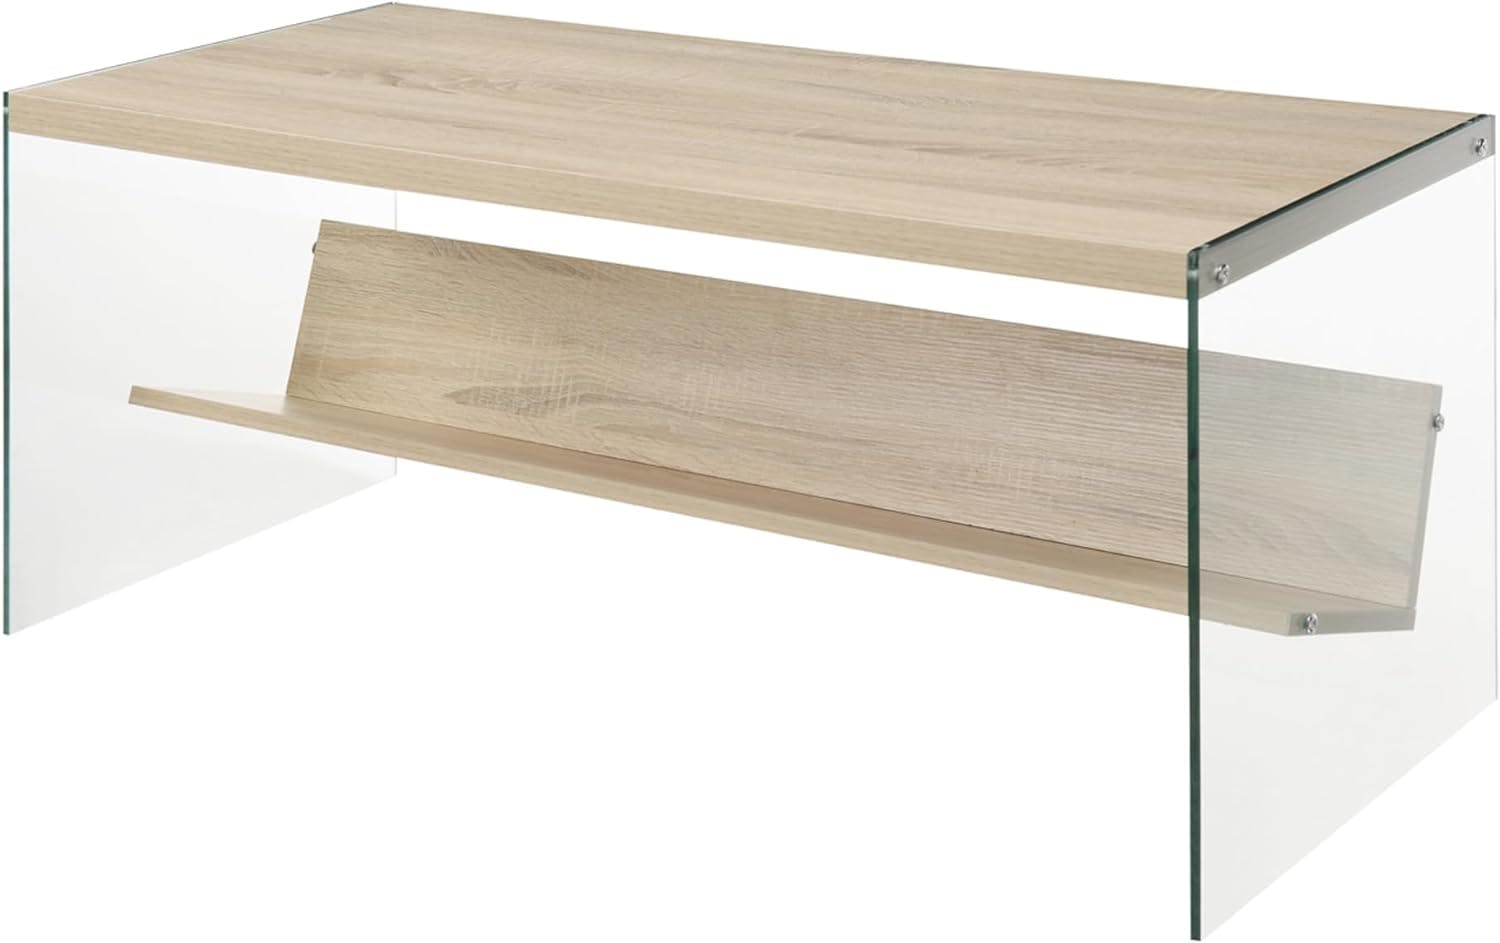 Weathered White and Glass Rectangular Coffee Table with Shelf